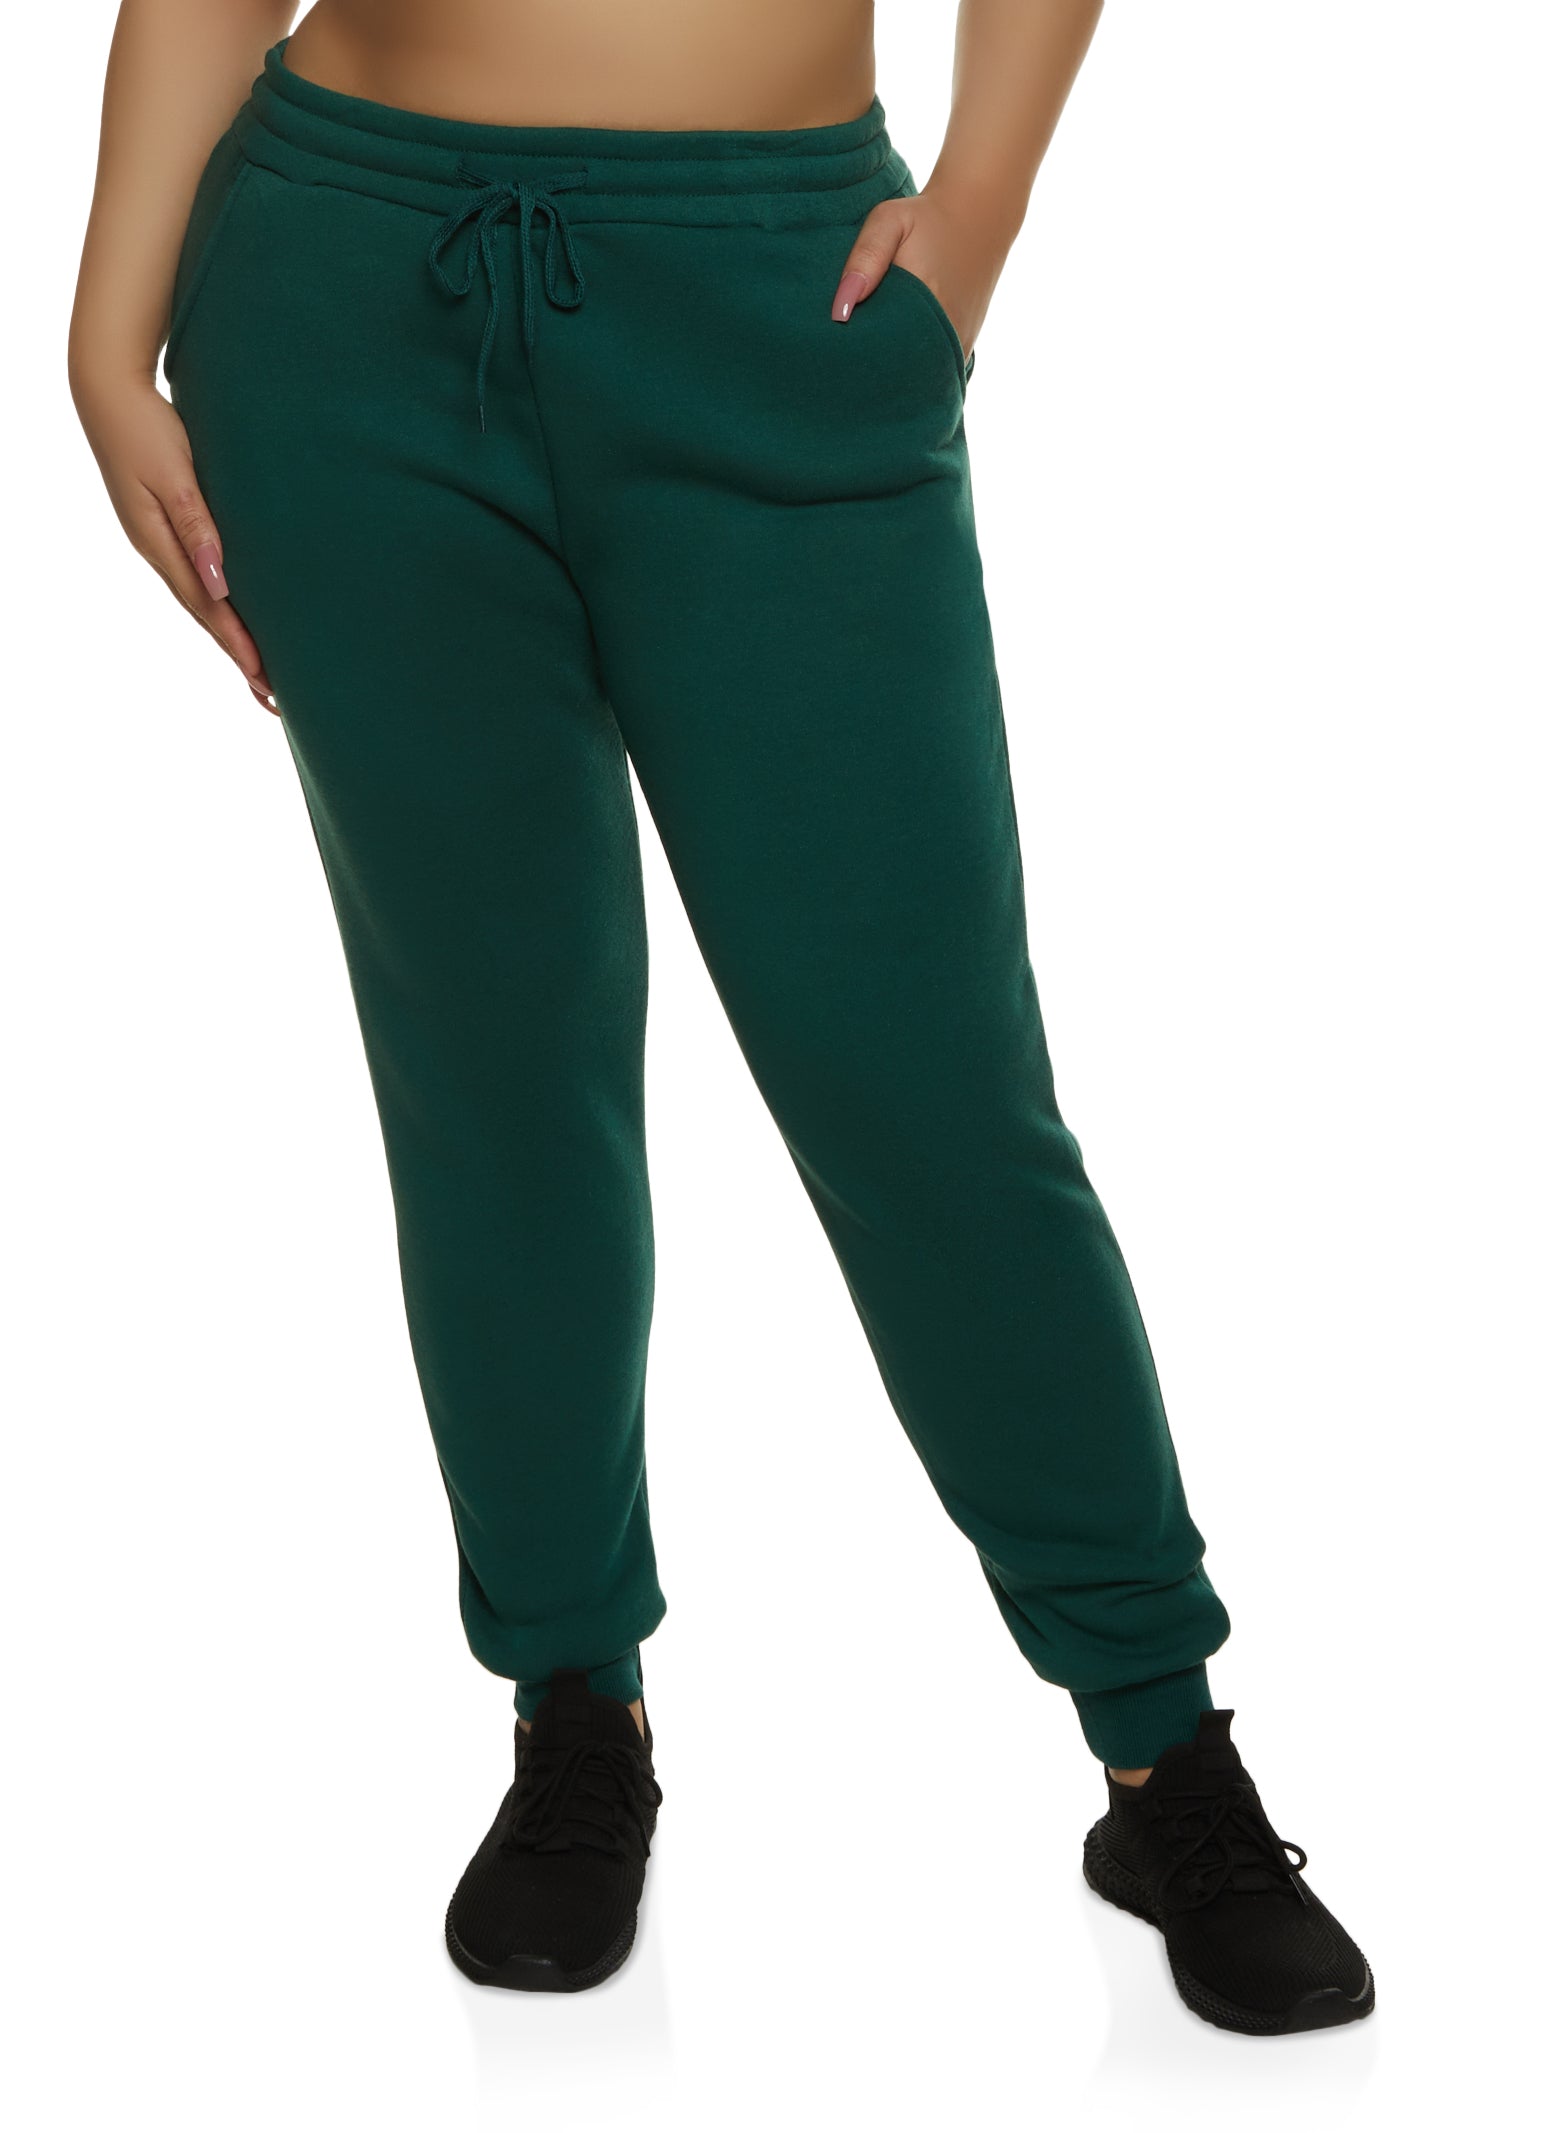 Plus Size Joggers and Sweatpants, Everyday Low Prices